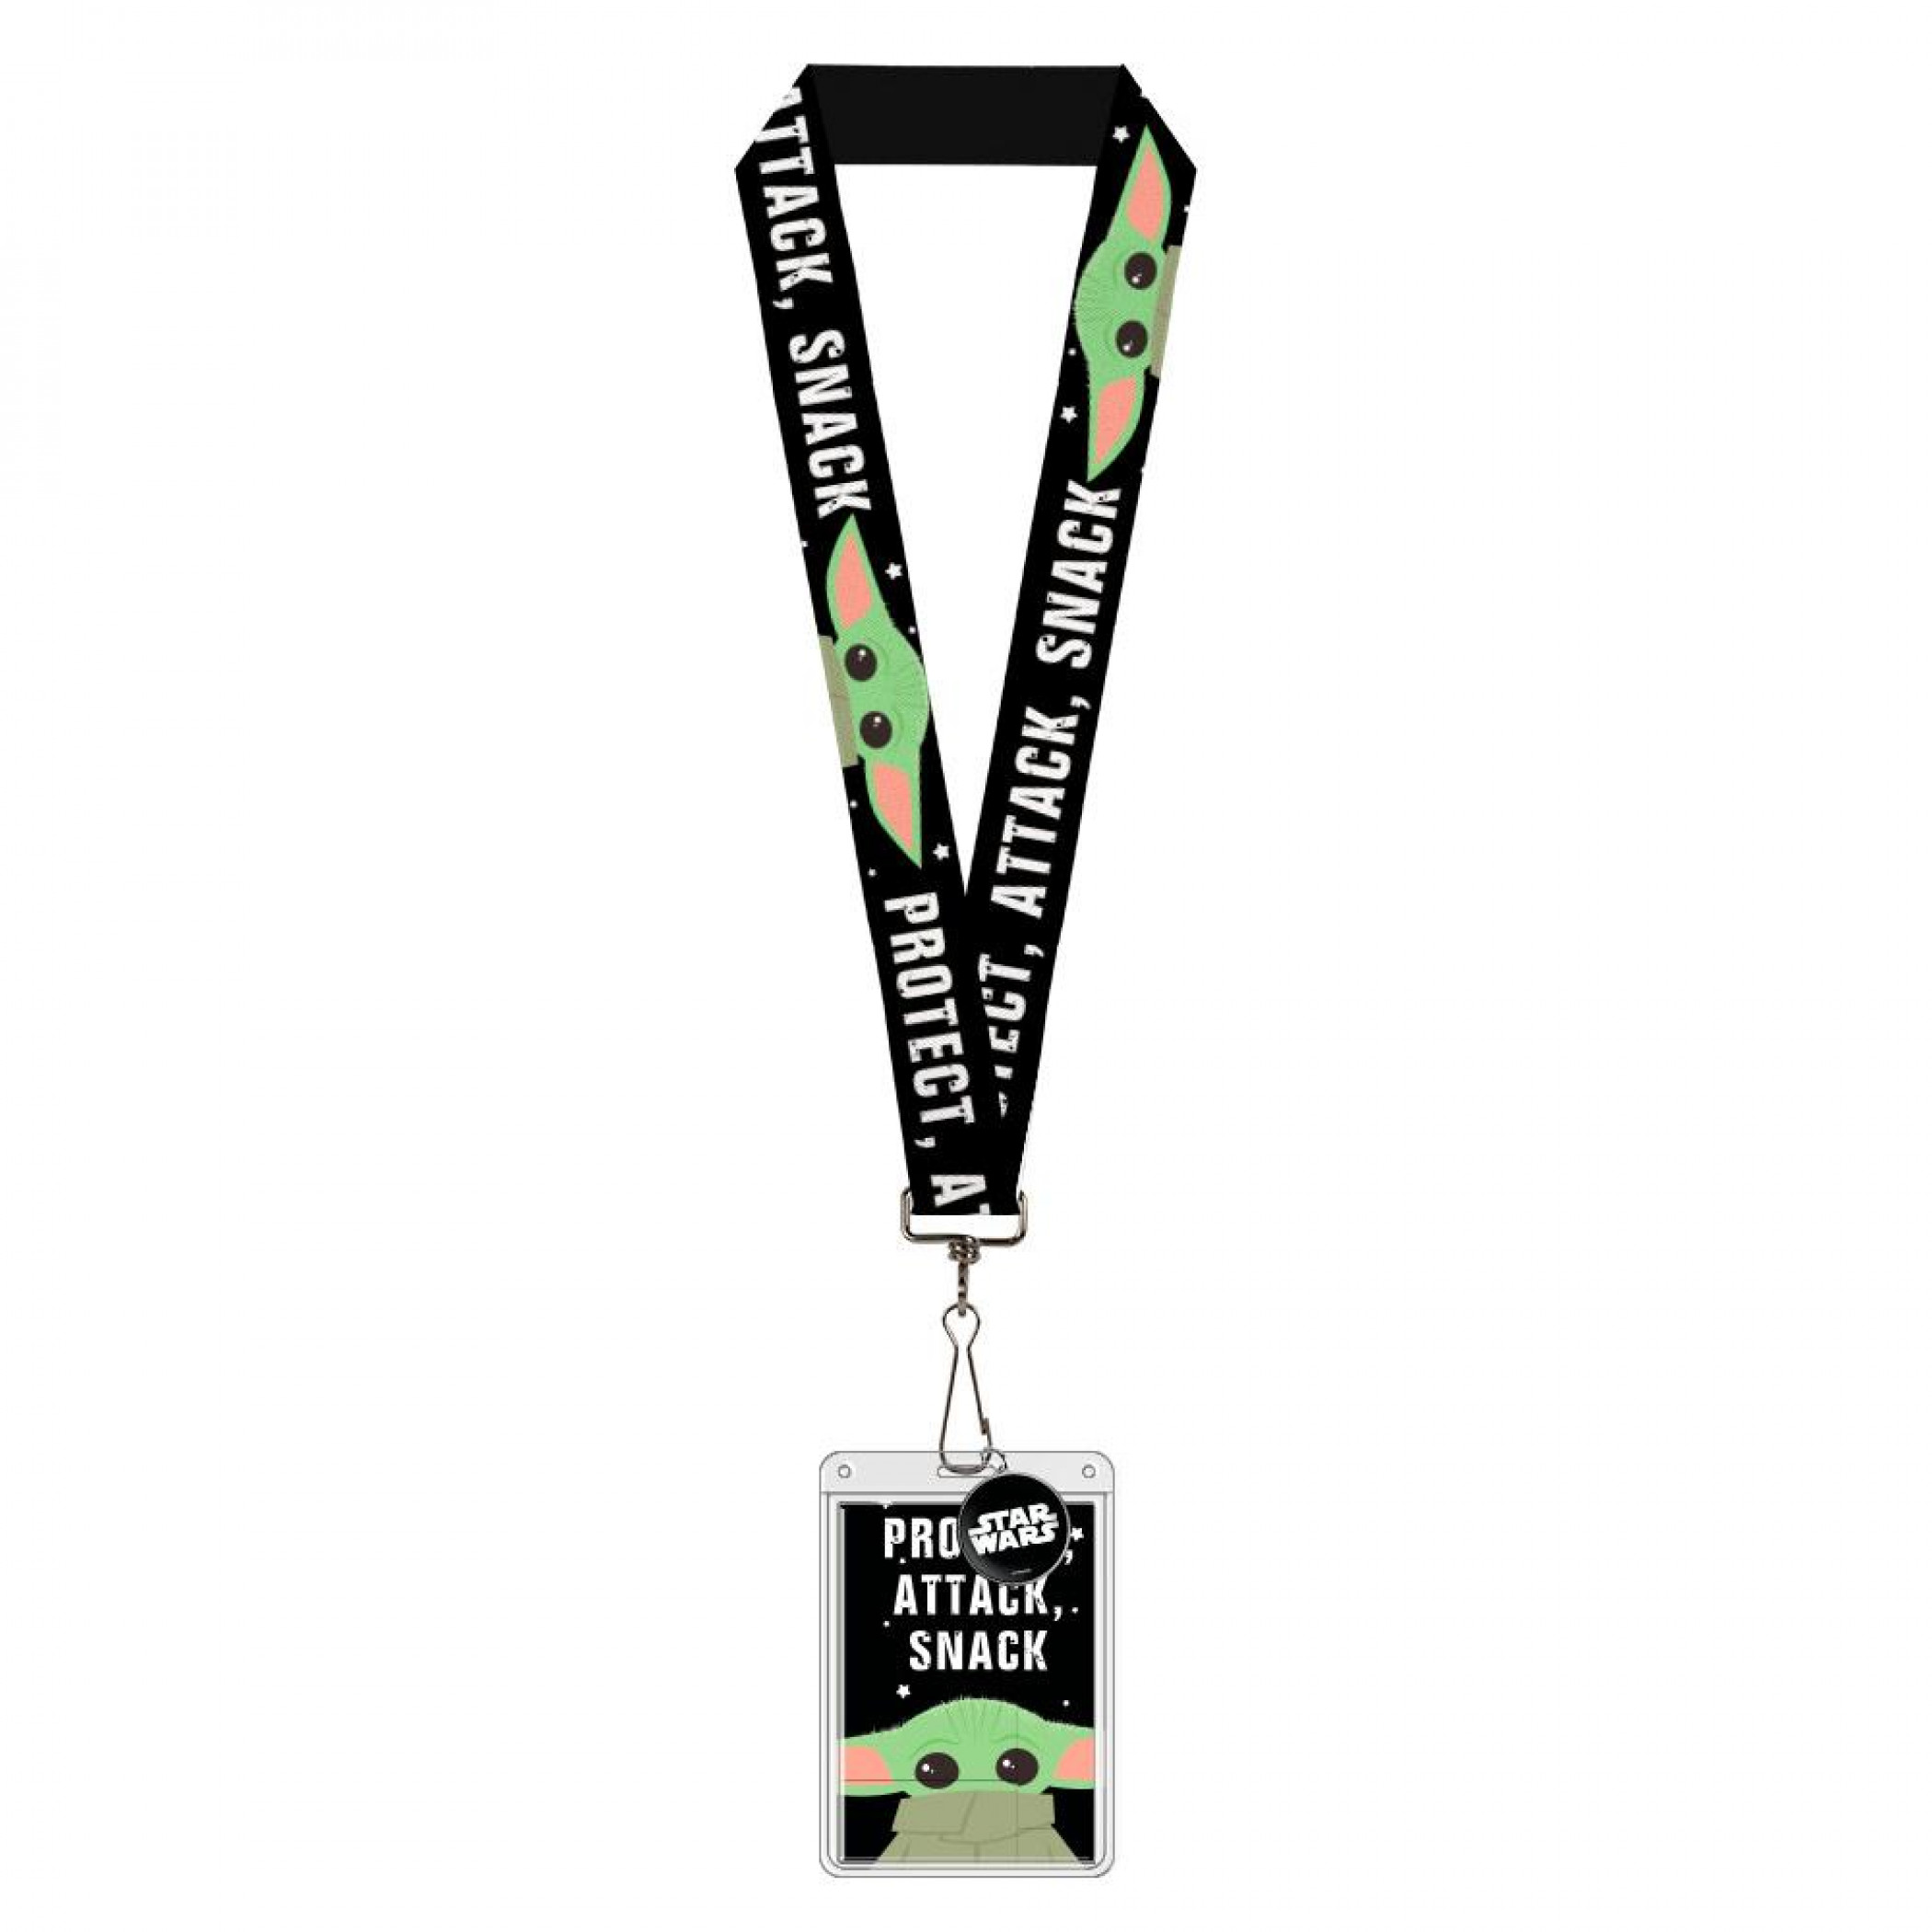 Star Wars Mandalorian "The Child" Snack Attack Protect Lanyard